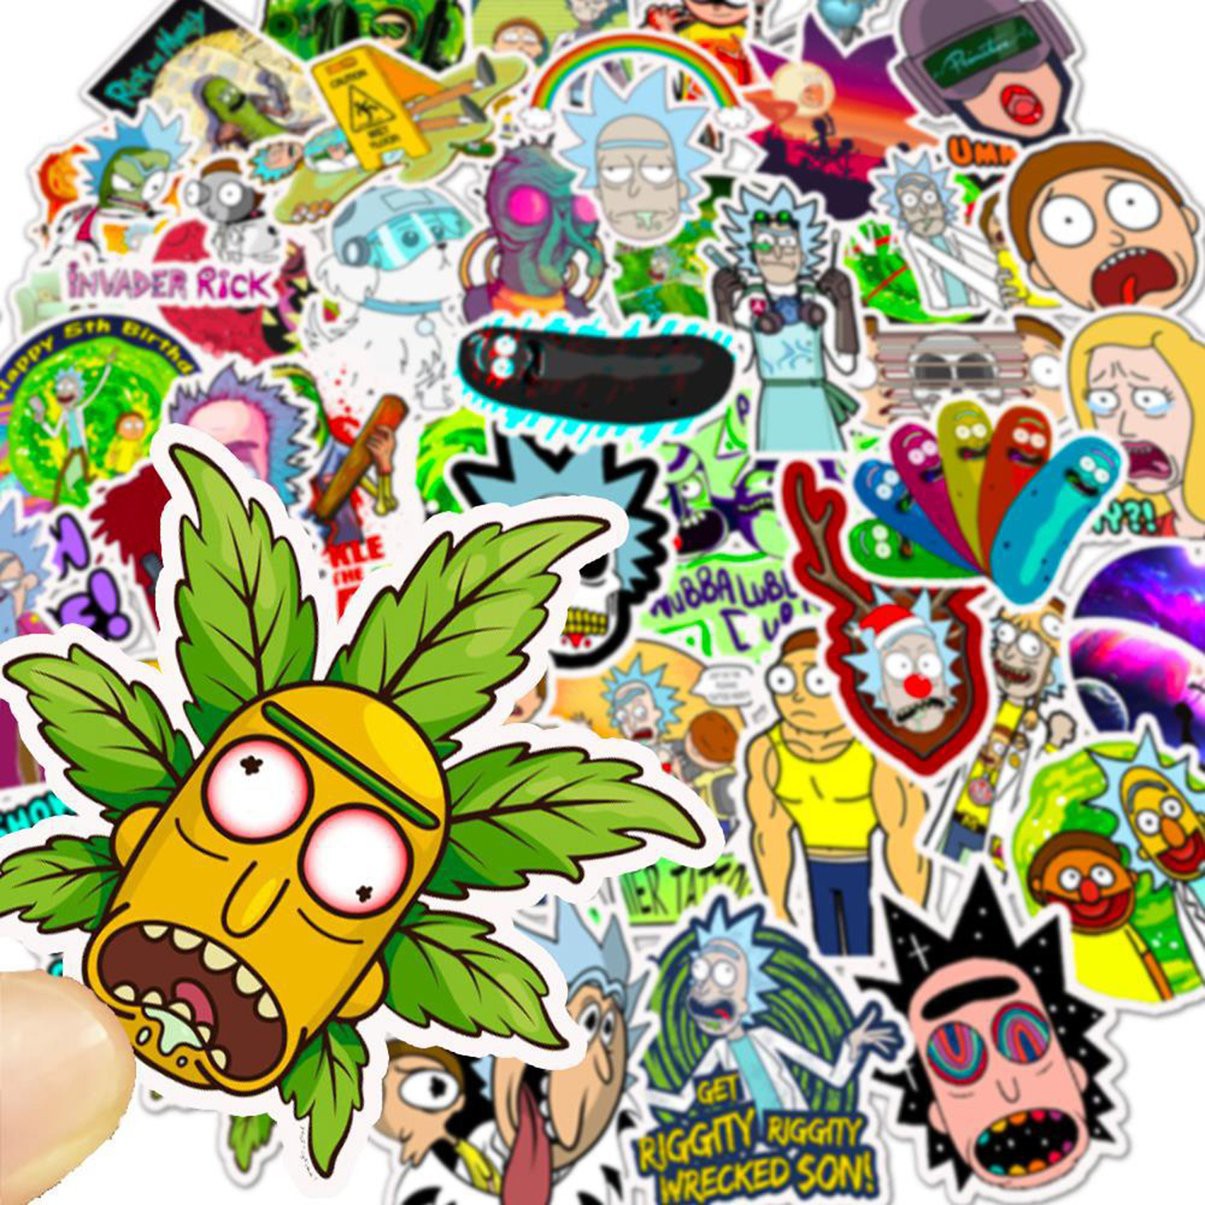 Rick And Morty Themed Cartoons Stickers, Stickerbomb Laptop Guitar Skateboard